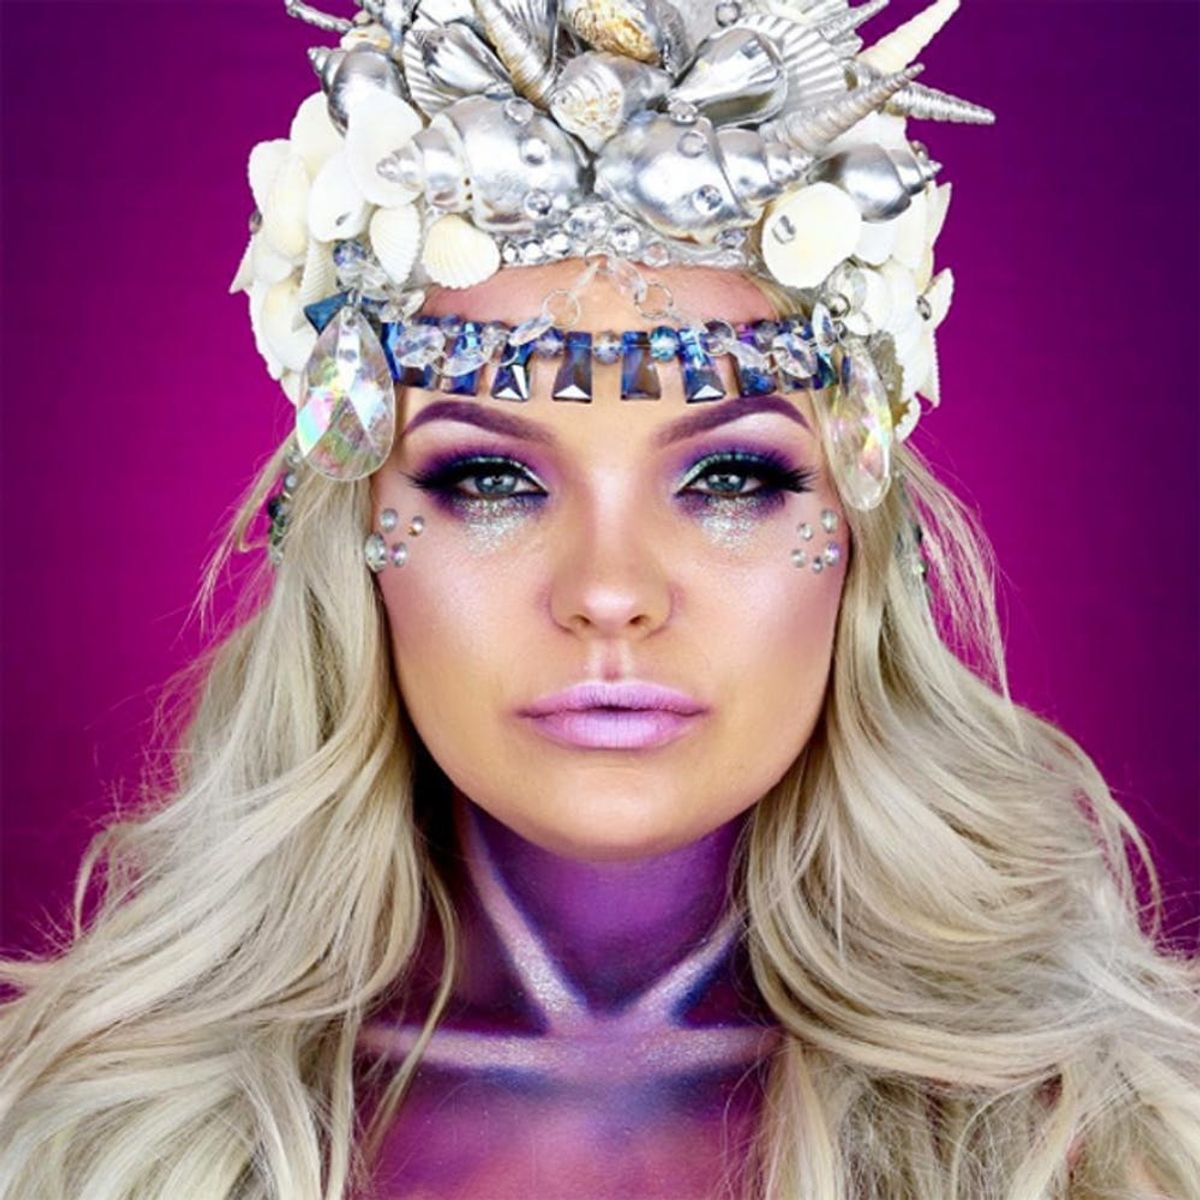 Transform into a Mermaid With This Ghoulish Glam Halloween Makeup ...